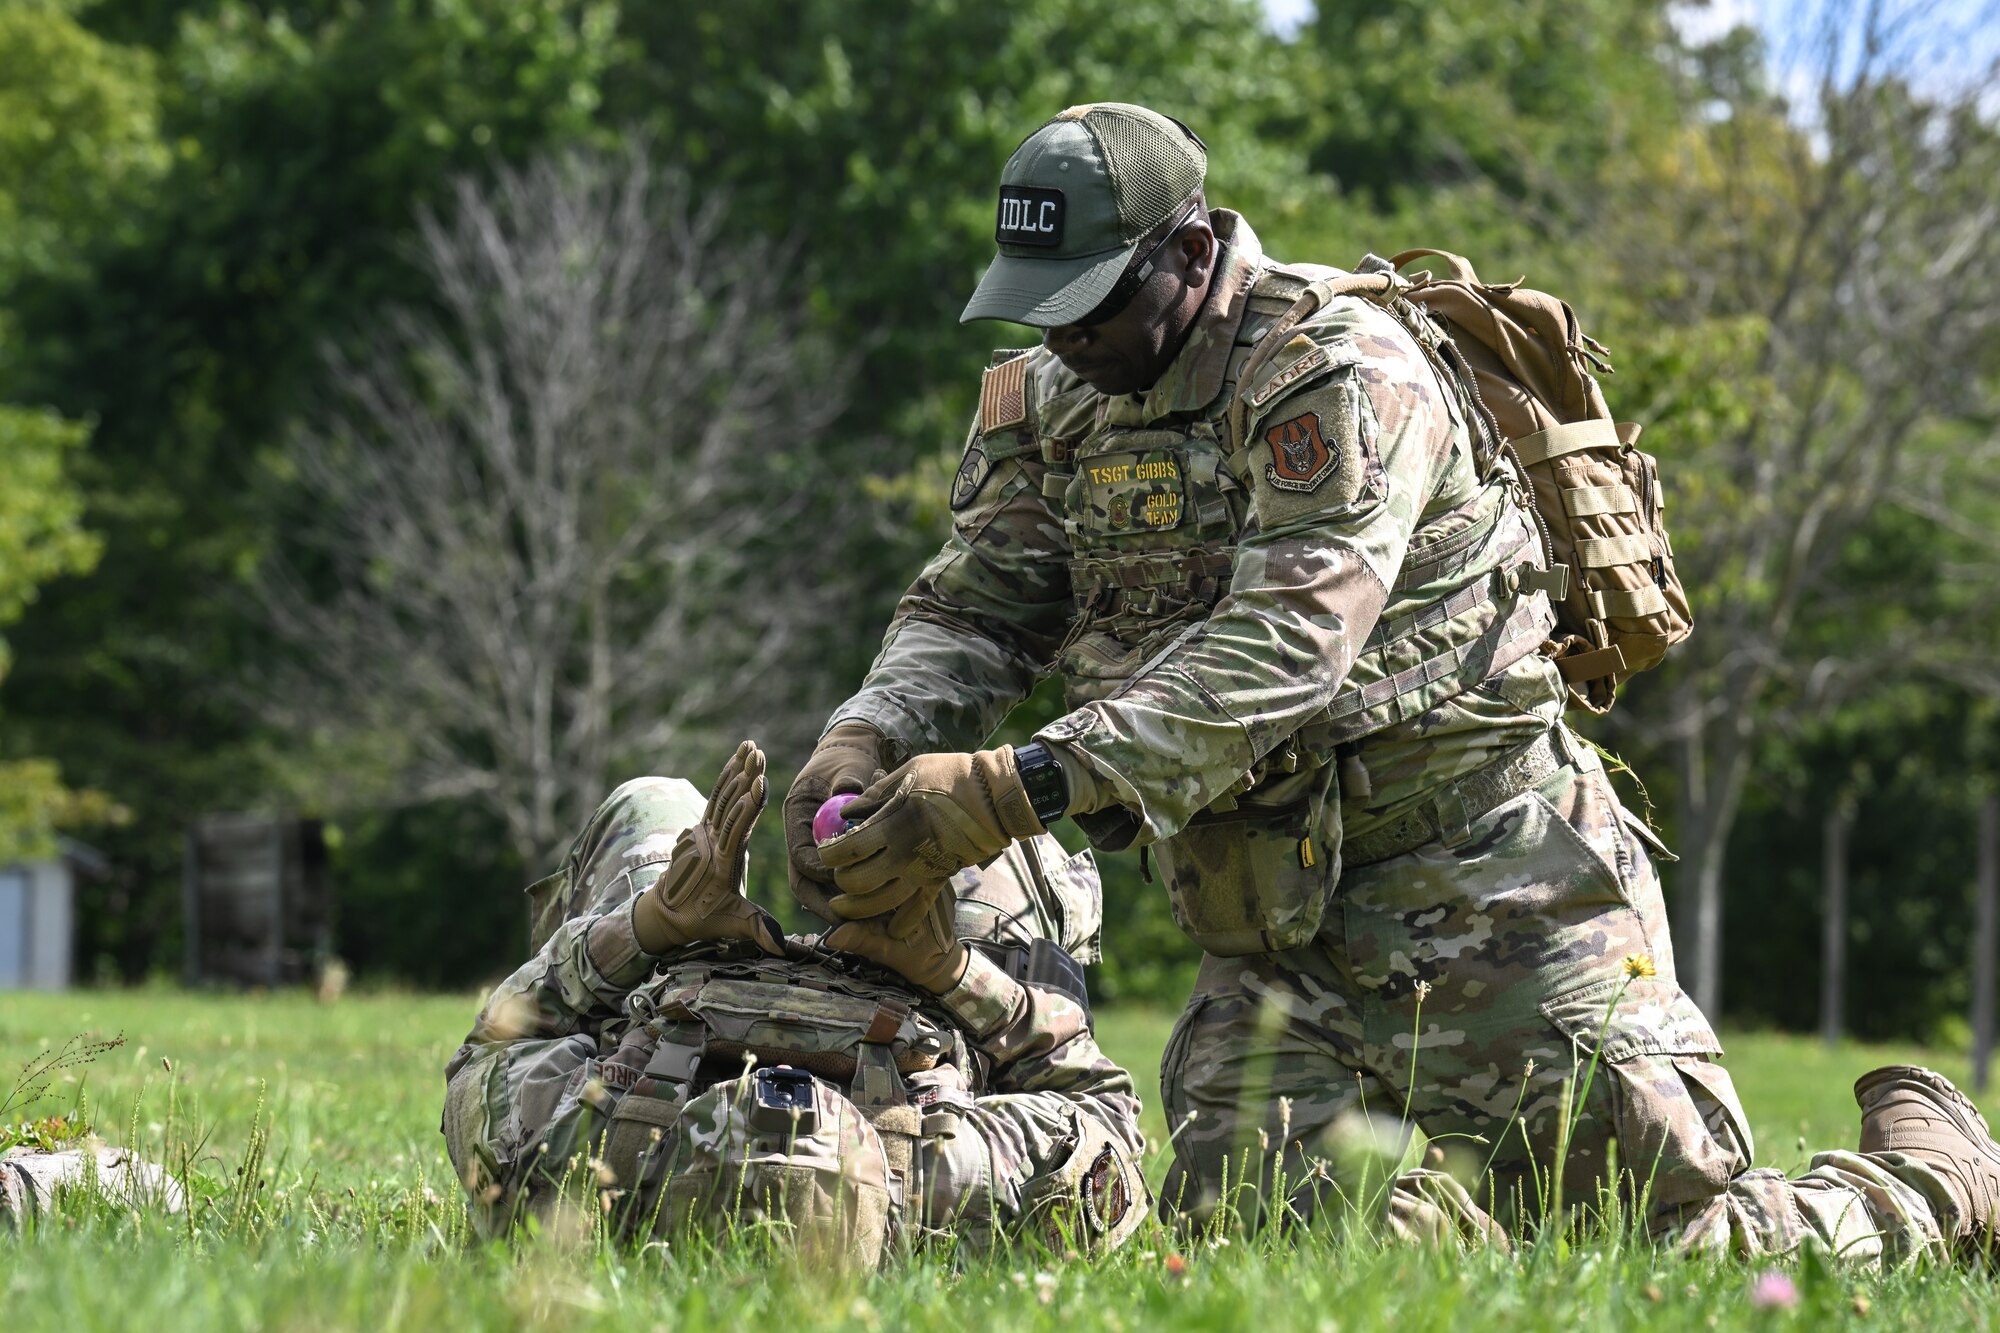 Staff Sgt. Arin Brown, a Defender assigned to the 919th Security Forces Squadron, Duke Field, Florida, receives a practice grenade from Tech. Sgt. Darnnelle Gibbs, an Integrated Defense Leadership Course cadre member assigned to the 514th SFS, Joint Base McGuire-Dix-Lakehurst, New Jersey, during IDLC’s grenade training on Aug. 15, 2023, at Camp James A. Garfield Joint Military Training Center, Ohio.